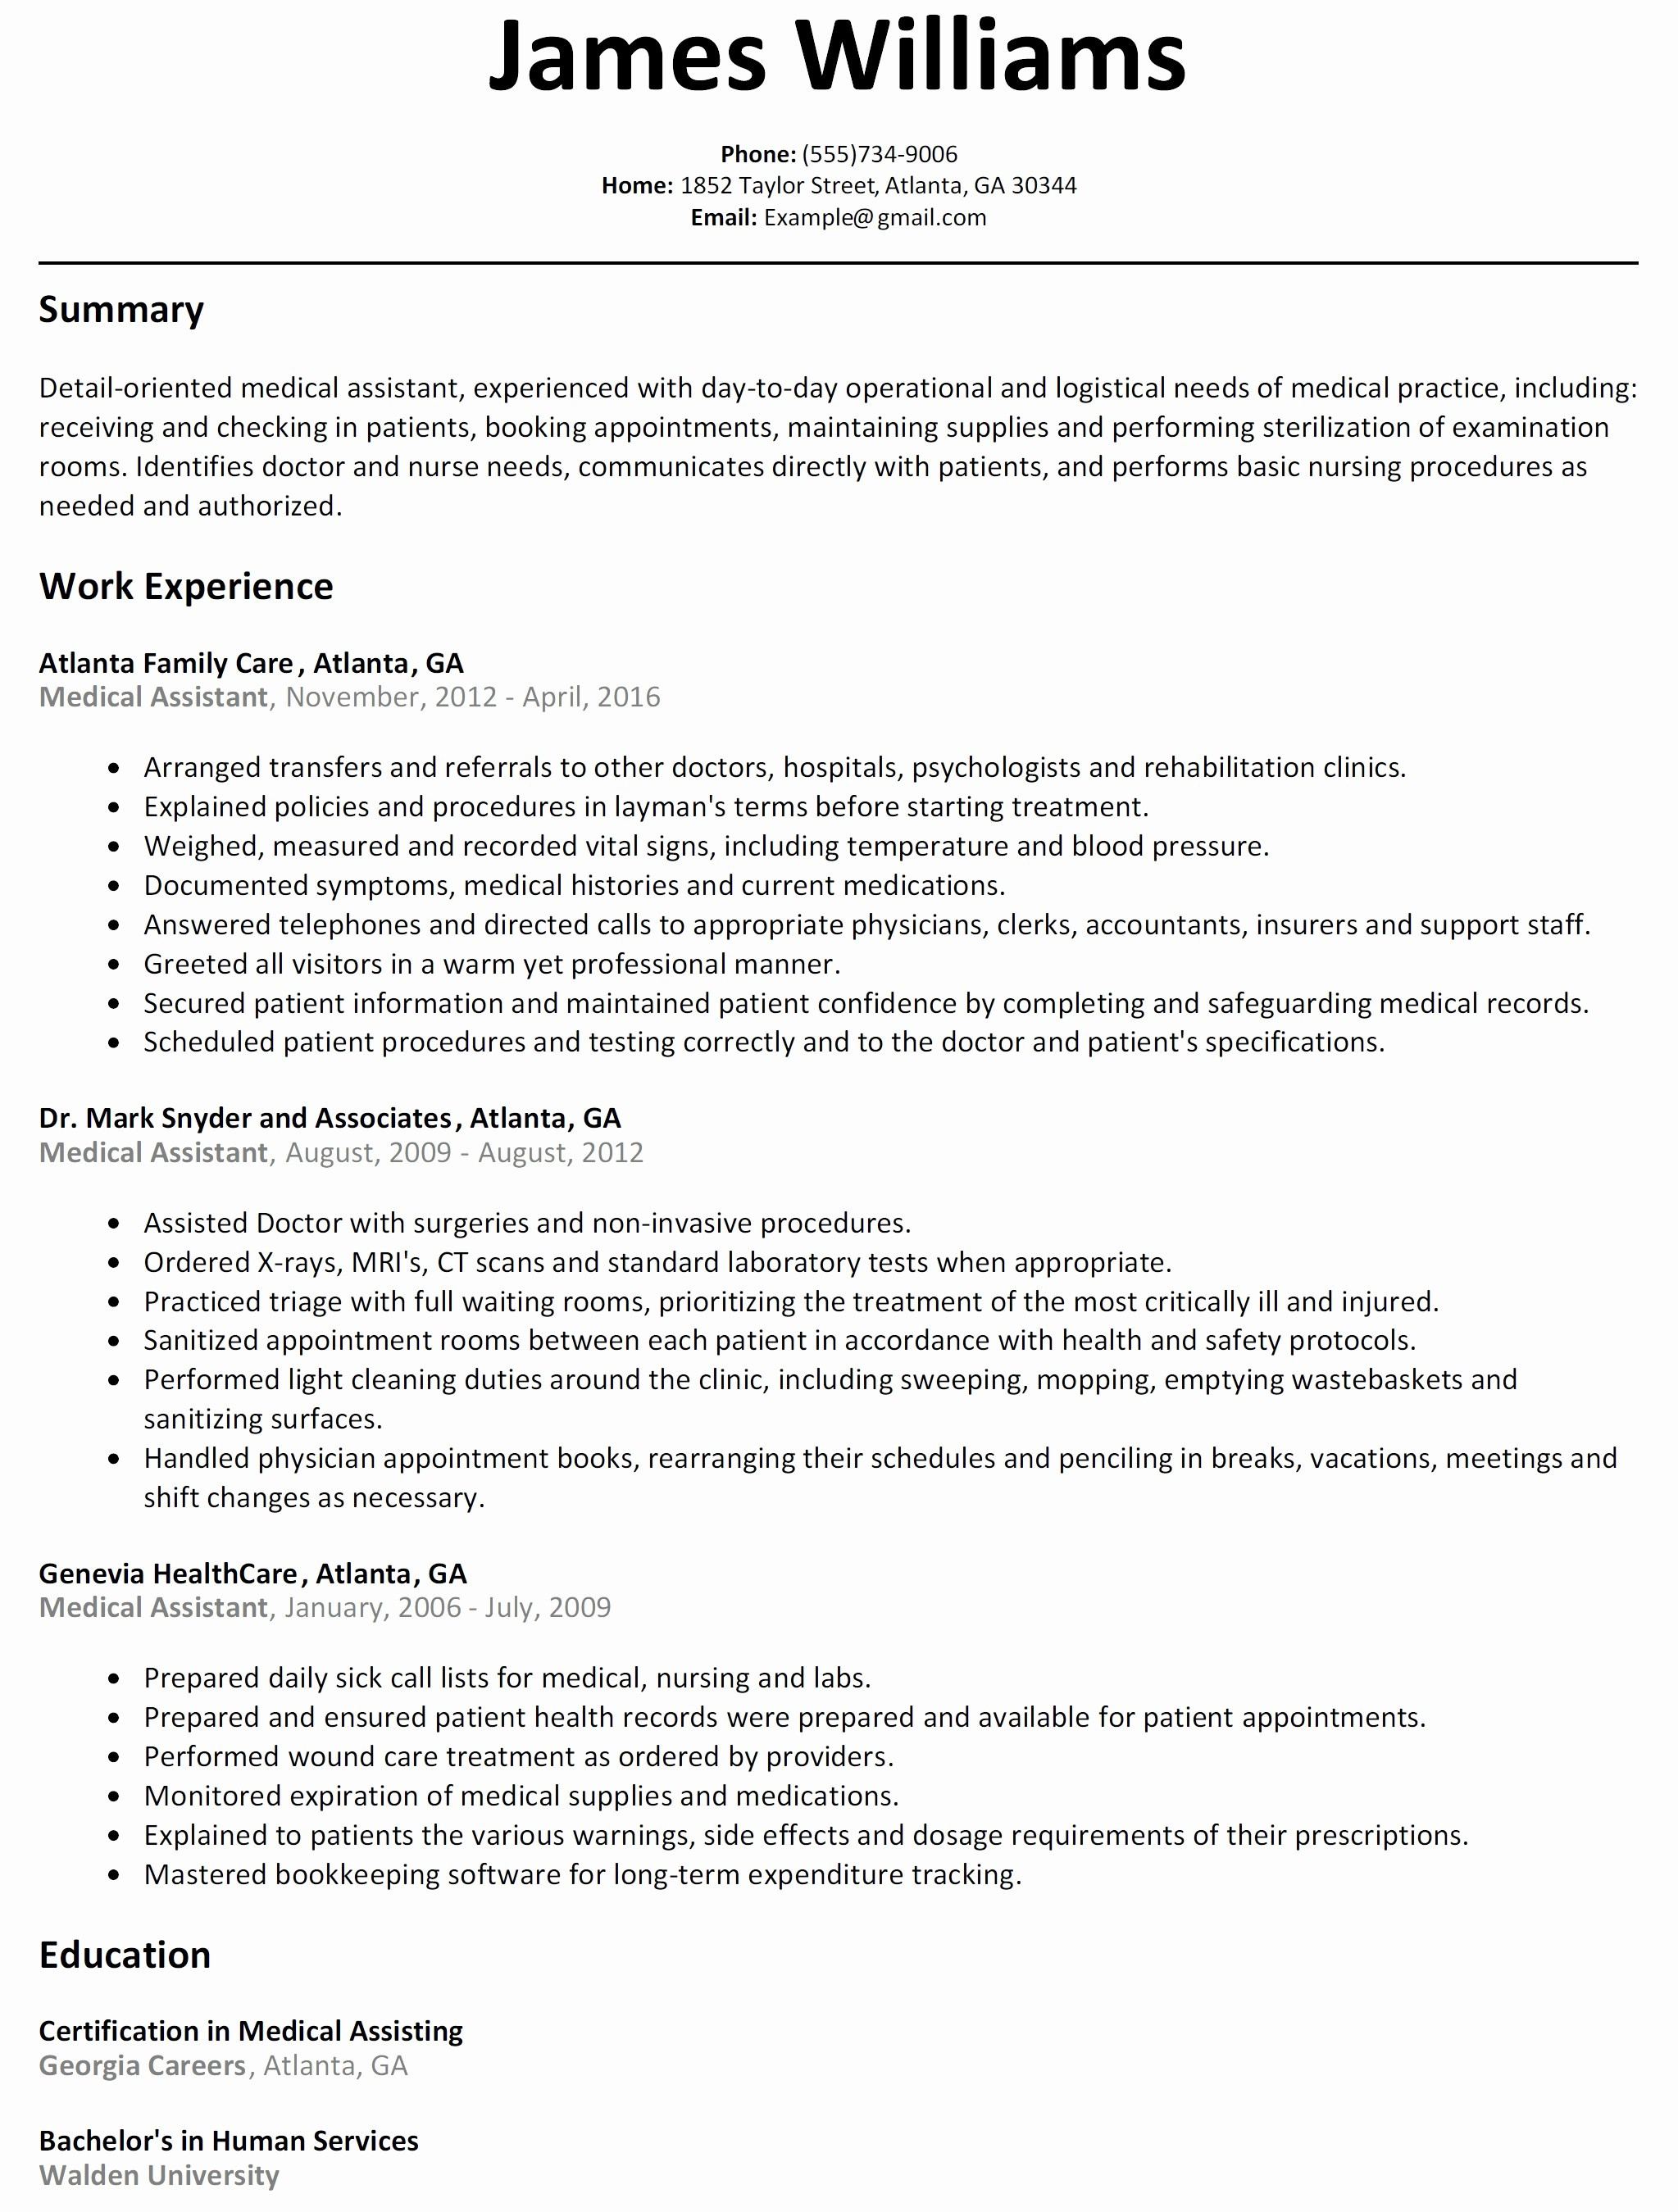 Customer Service Resume Examples Bjective For Resume Customer Service Fresh Call Center Resume